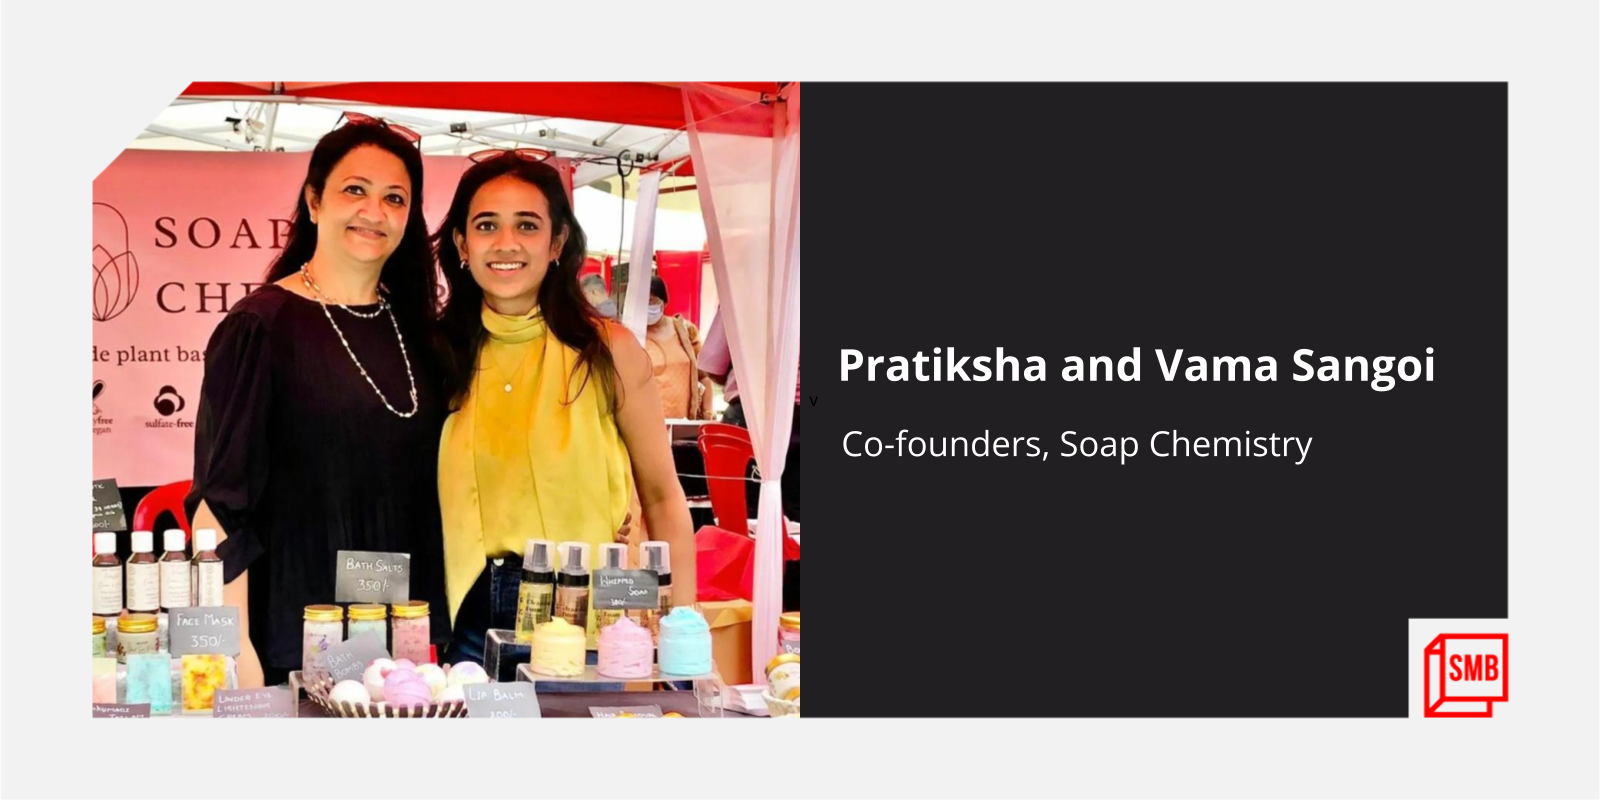 This mother-daughter duo started a soap brand from home with Rs 2 lakh capital, and now has global customers

